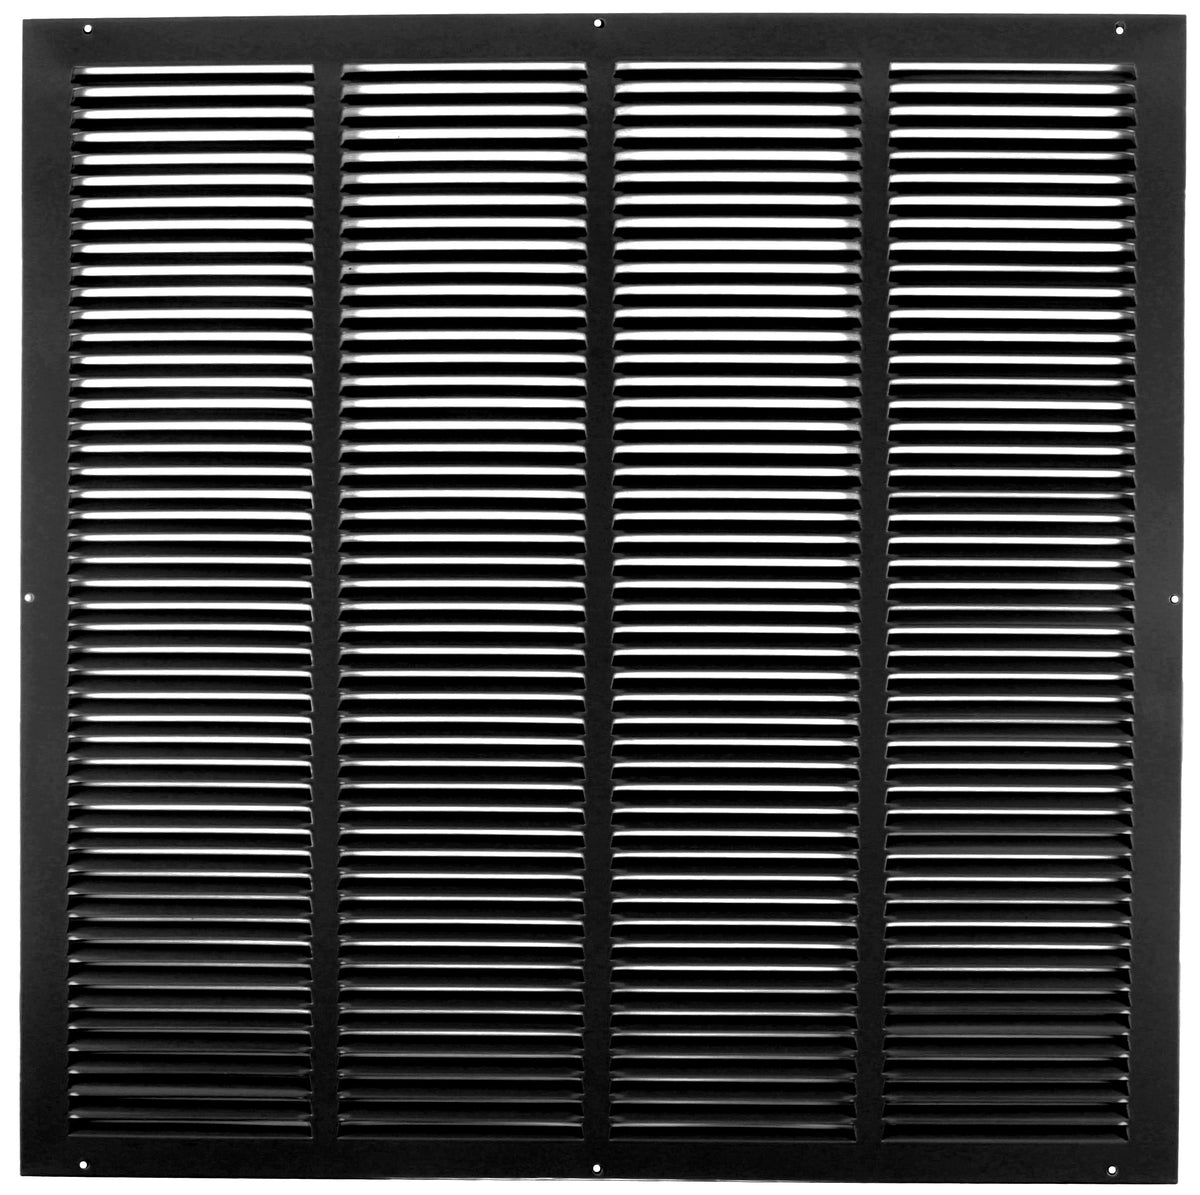 16&quot; X 16&quot; Air Vent Return Grilles - Sidewall and Ceiling - HVAC VENT DUCT COVER DIFFUSER - Steel